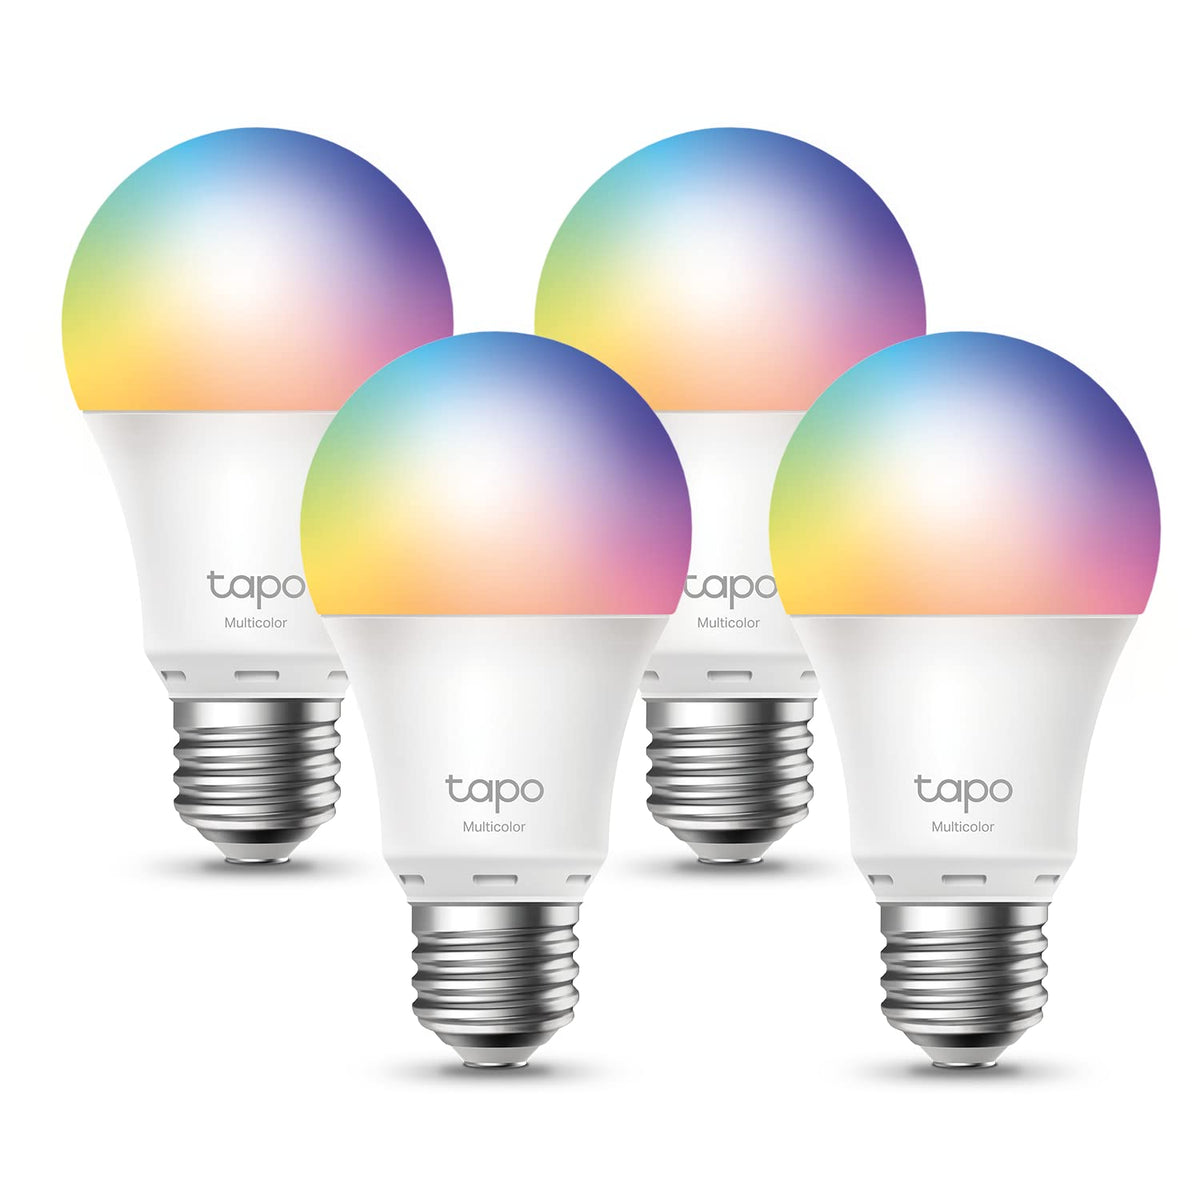 TP-Link Tapo Smart Light Bulbs, 16M Colors RGBW, Dimmable Tapo L530E(4